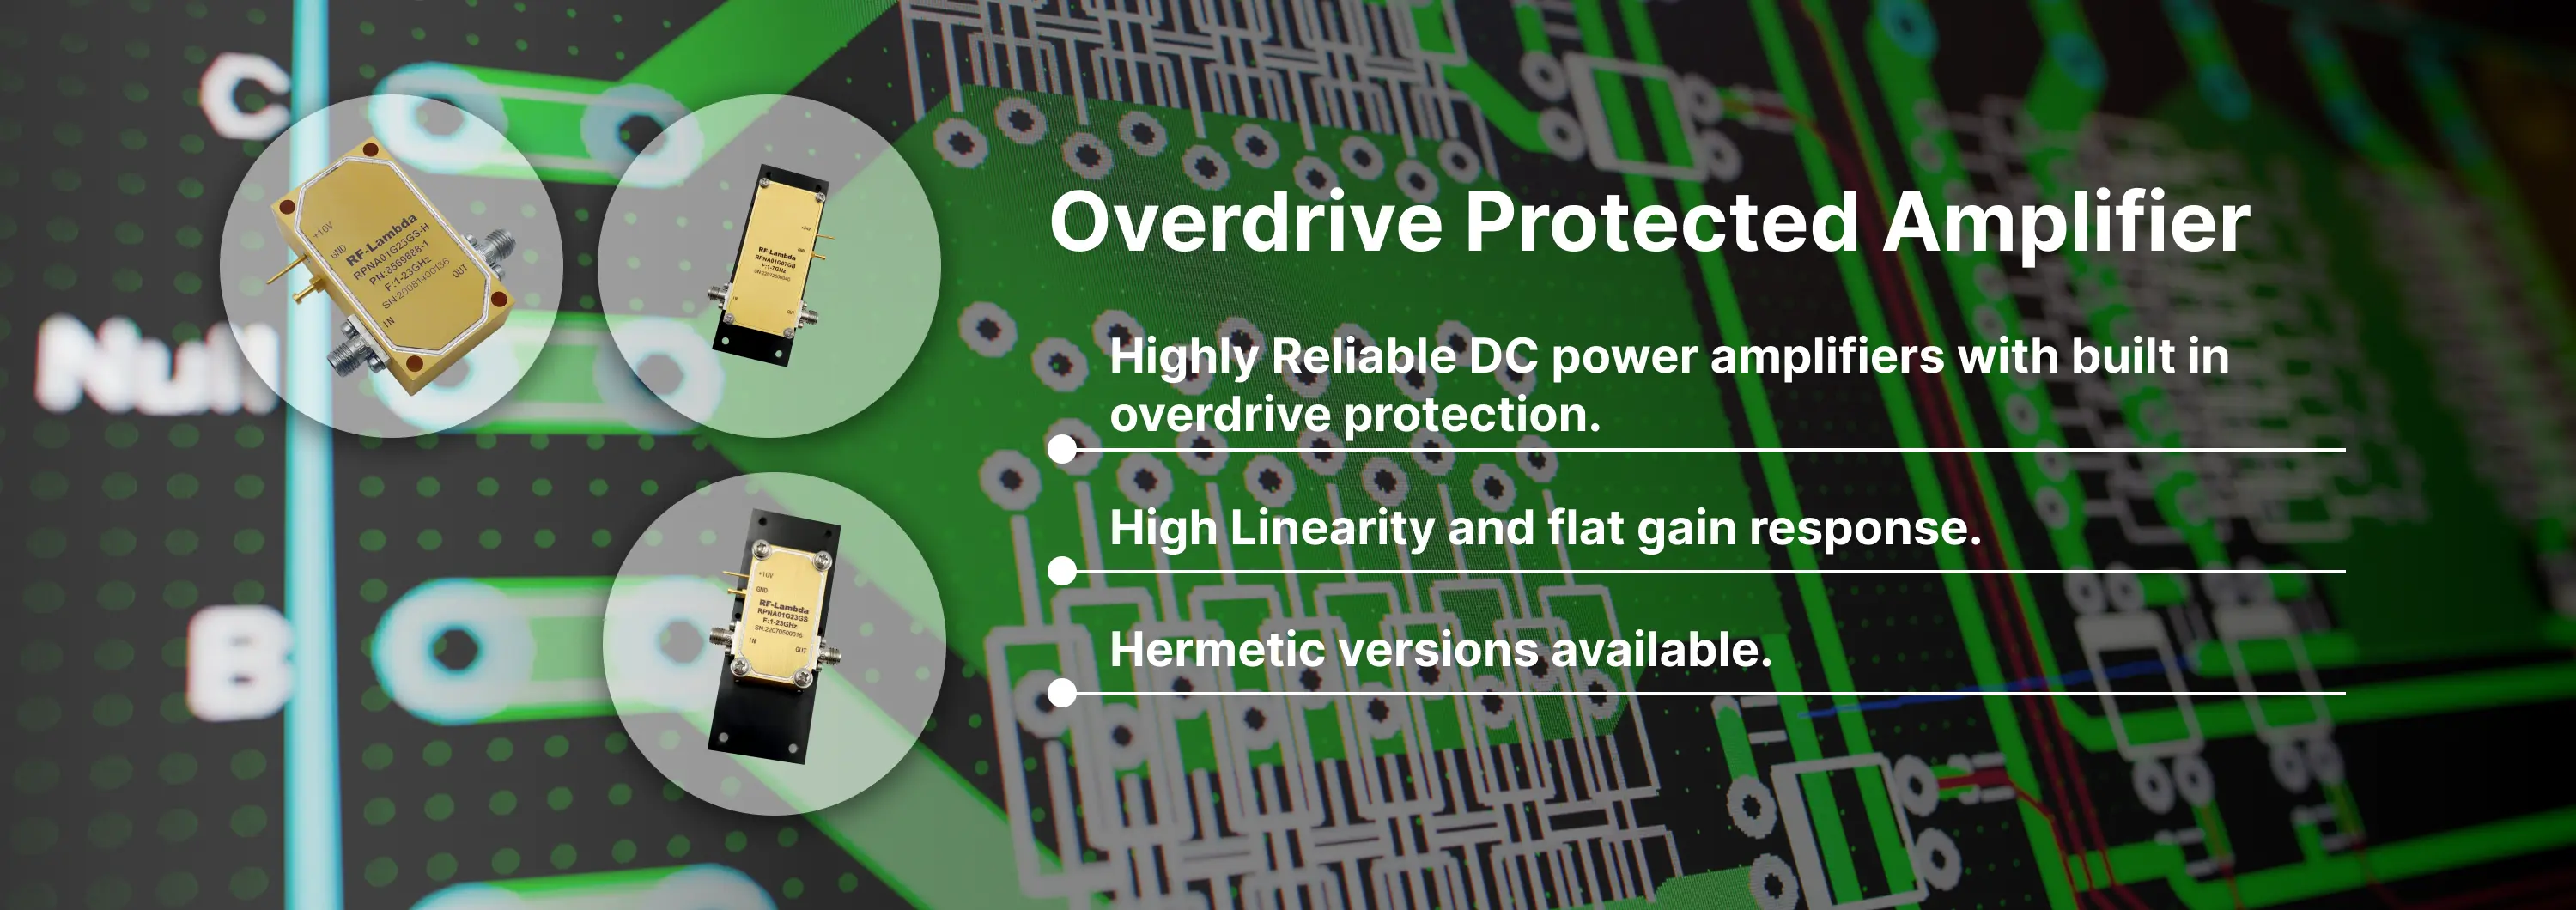 Overdrive Protected Amplifier Banner